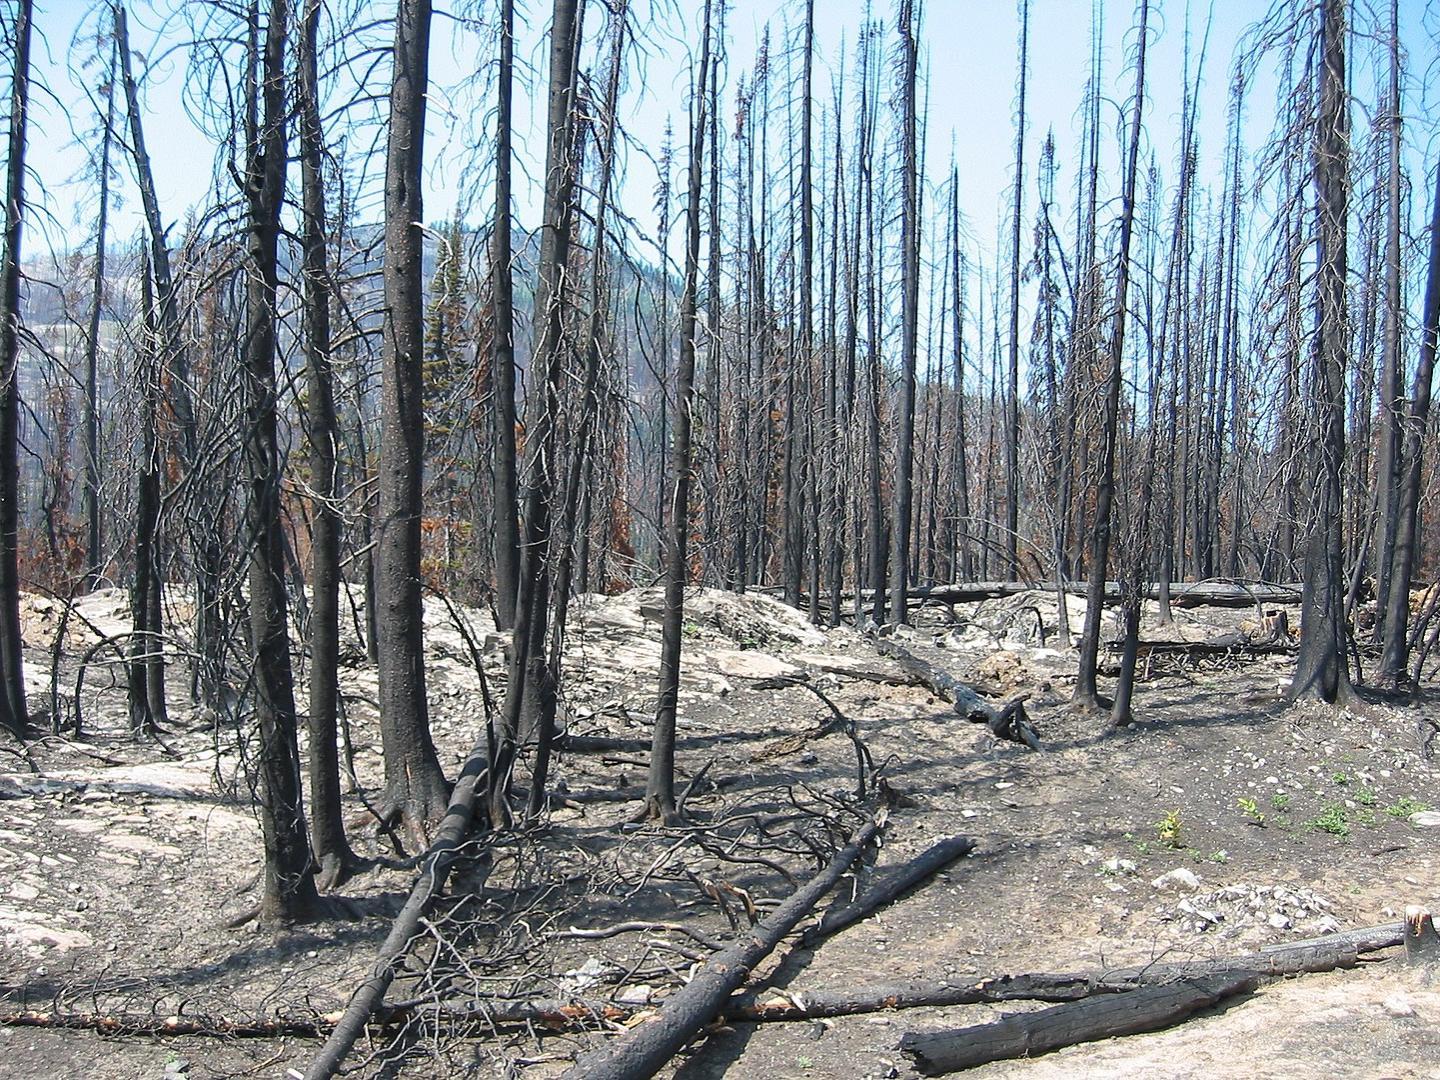 Burnt out forest with bare, charred trees